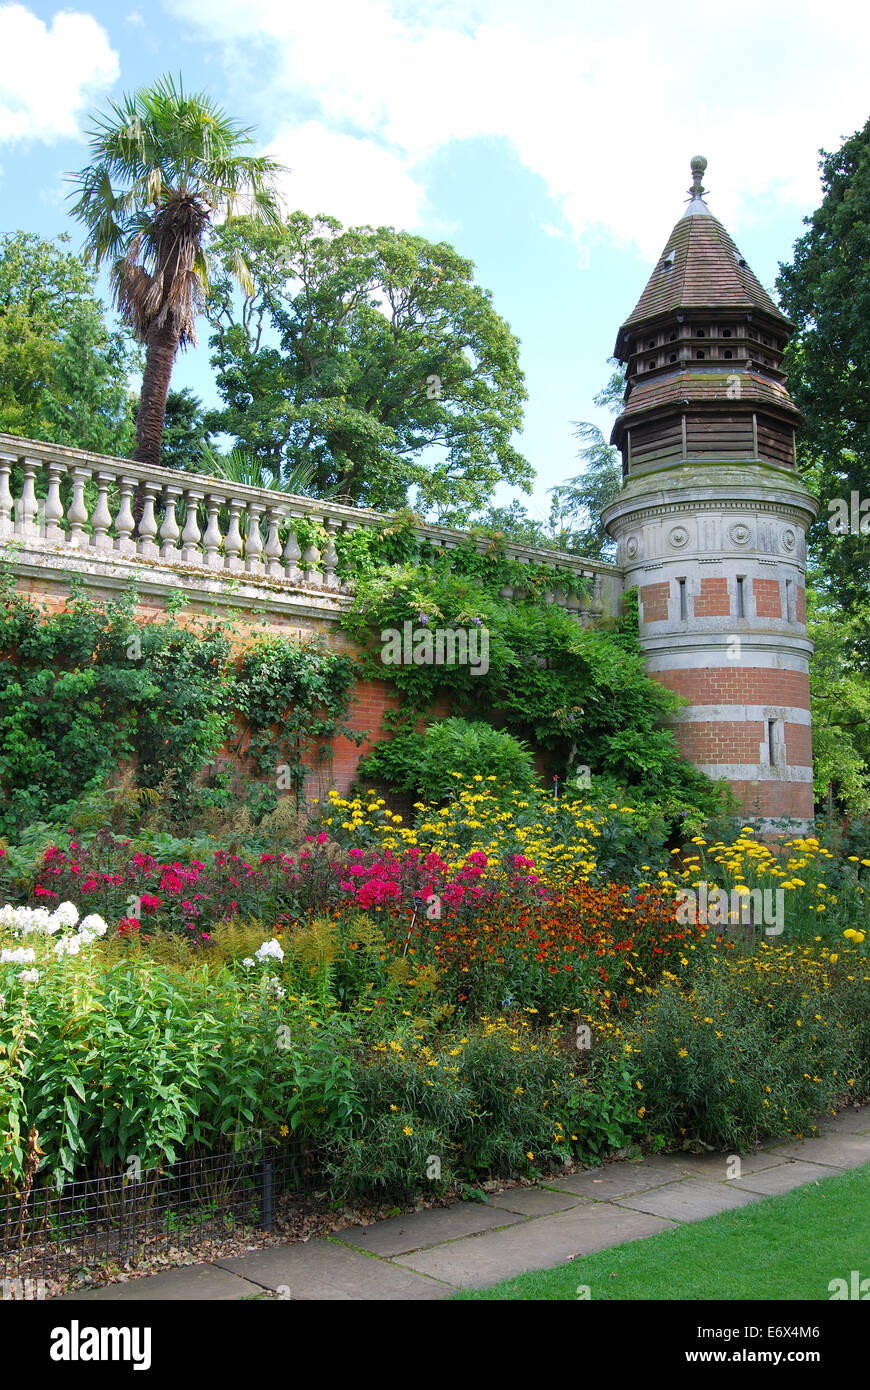 The dovecote and garden at Cliveden, Taplow, Buckinghamshire, England, United Kingdom Stock Photo